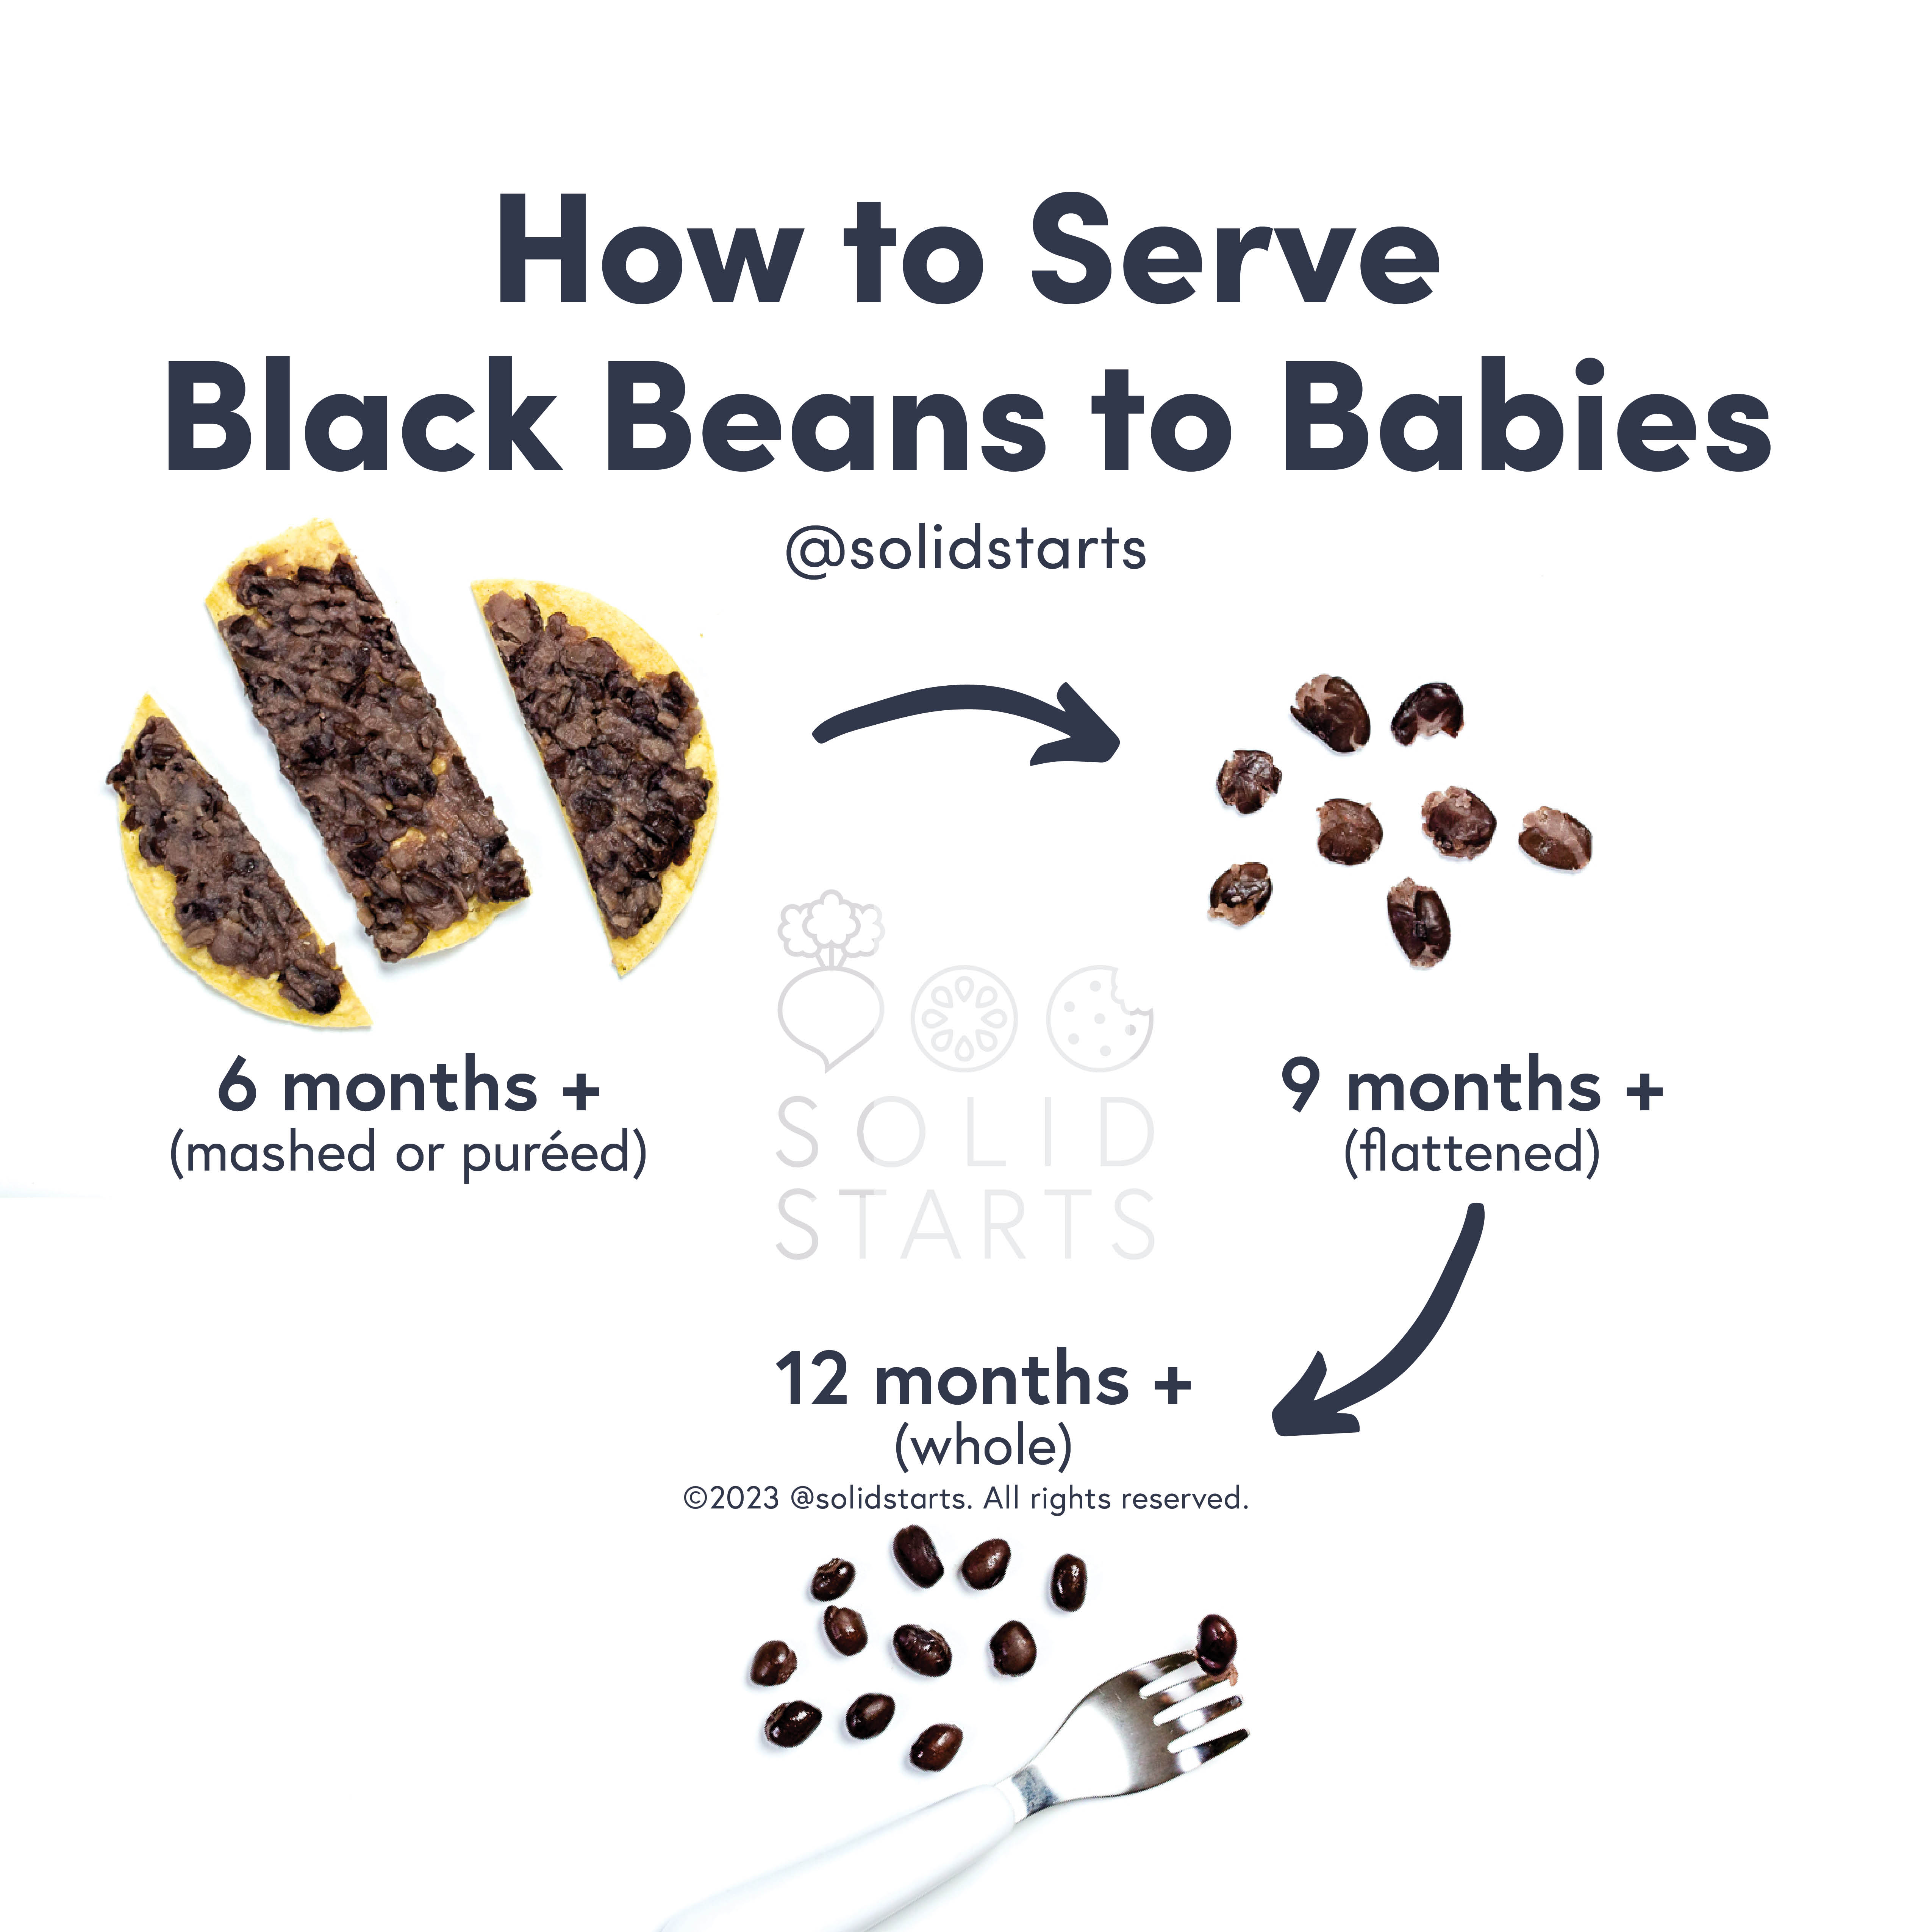 How to serve black beans to babies